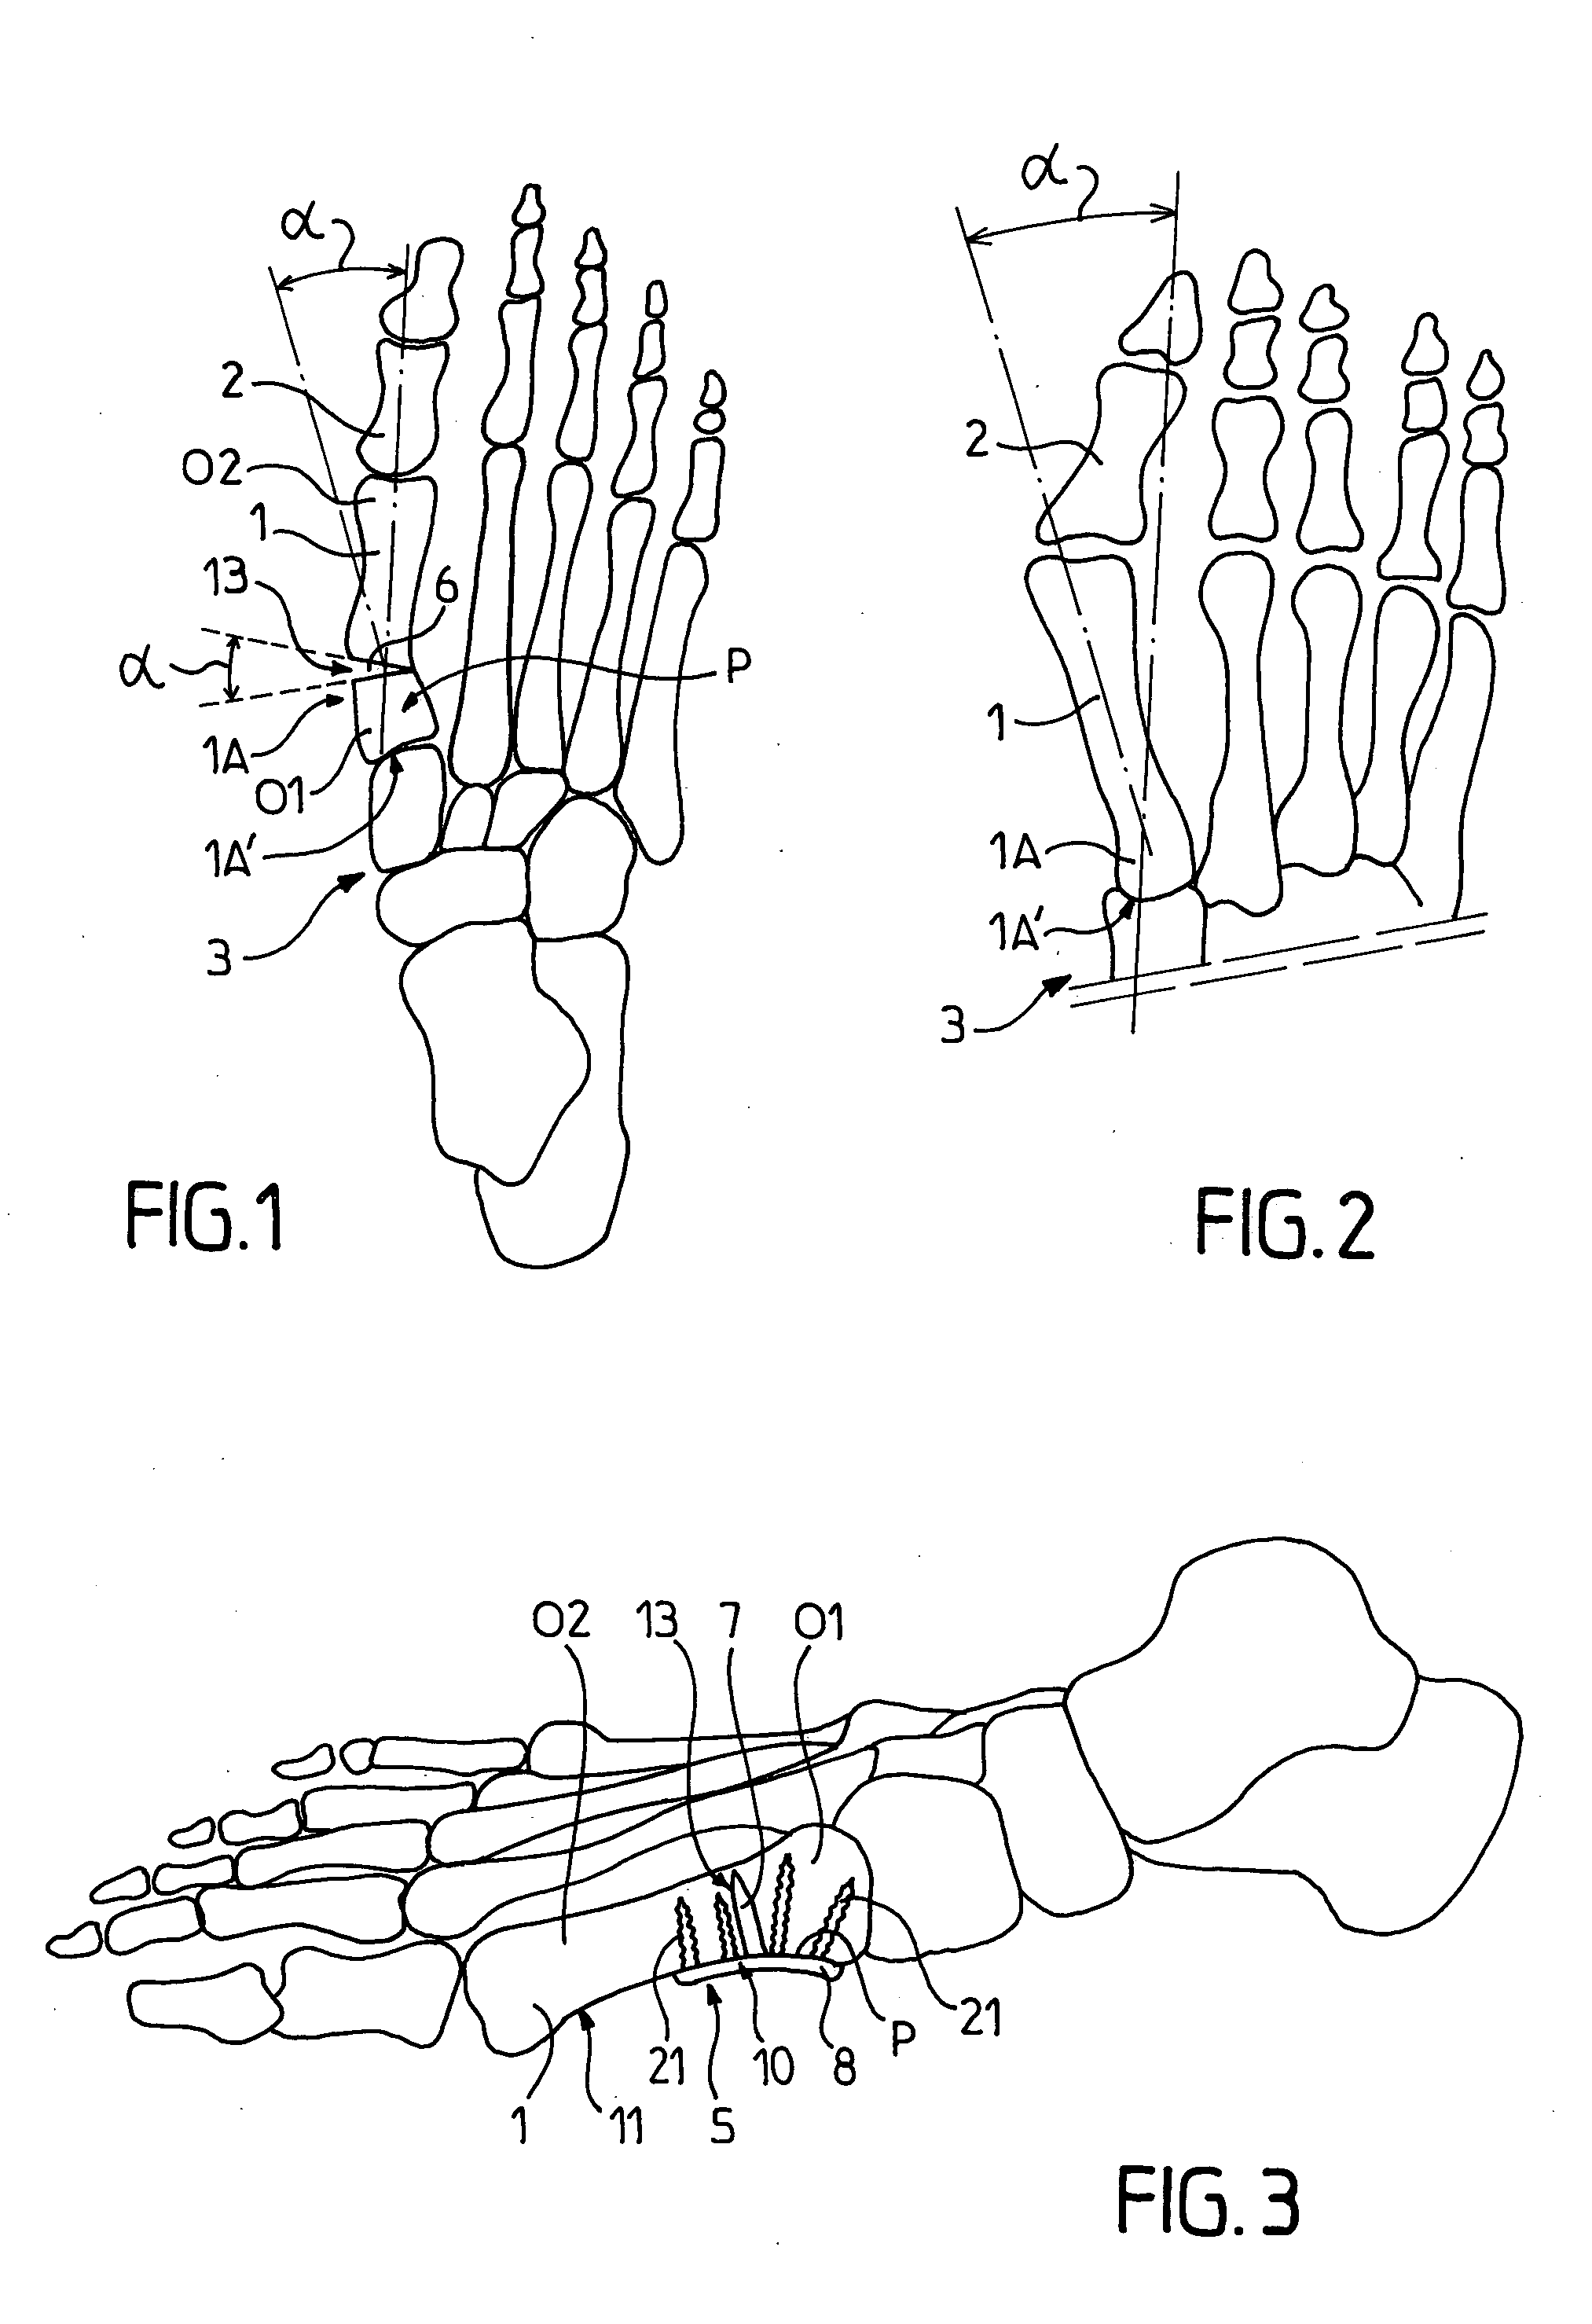 Fastener implant for osteosynthesis of fragments of a first metatarsal bone that is broken or osteotomized in its proximal portion and a corresponding osteosynthesis method